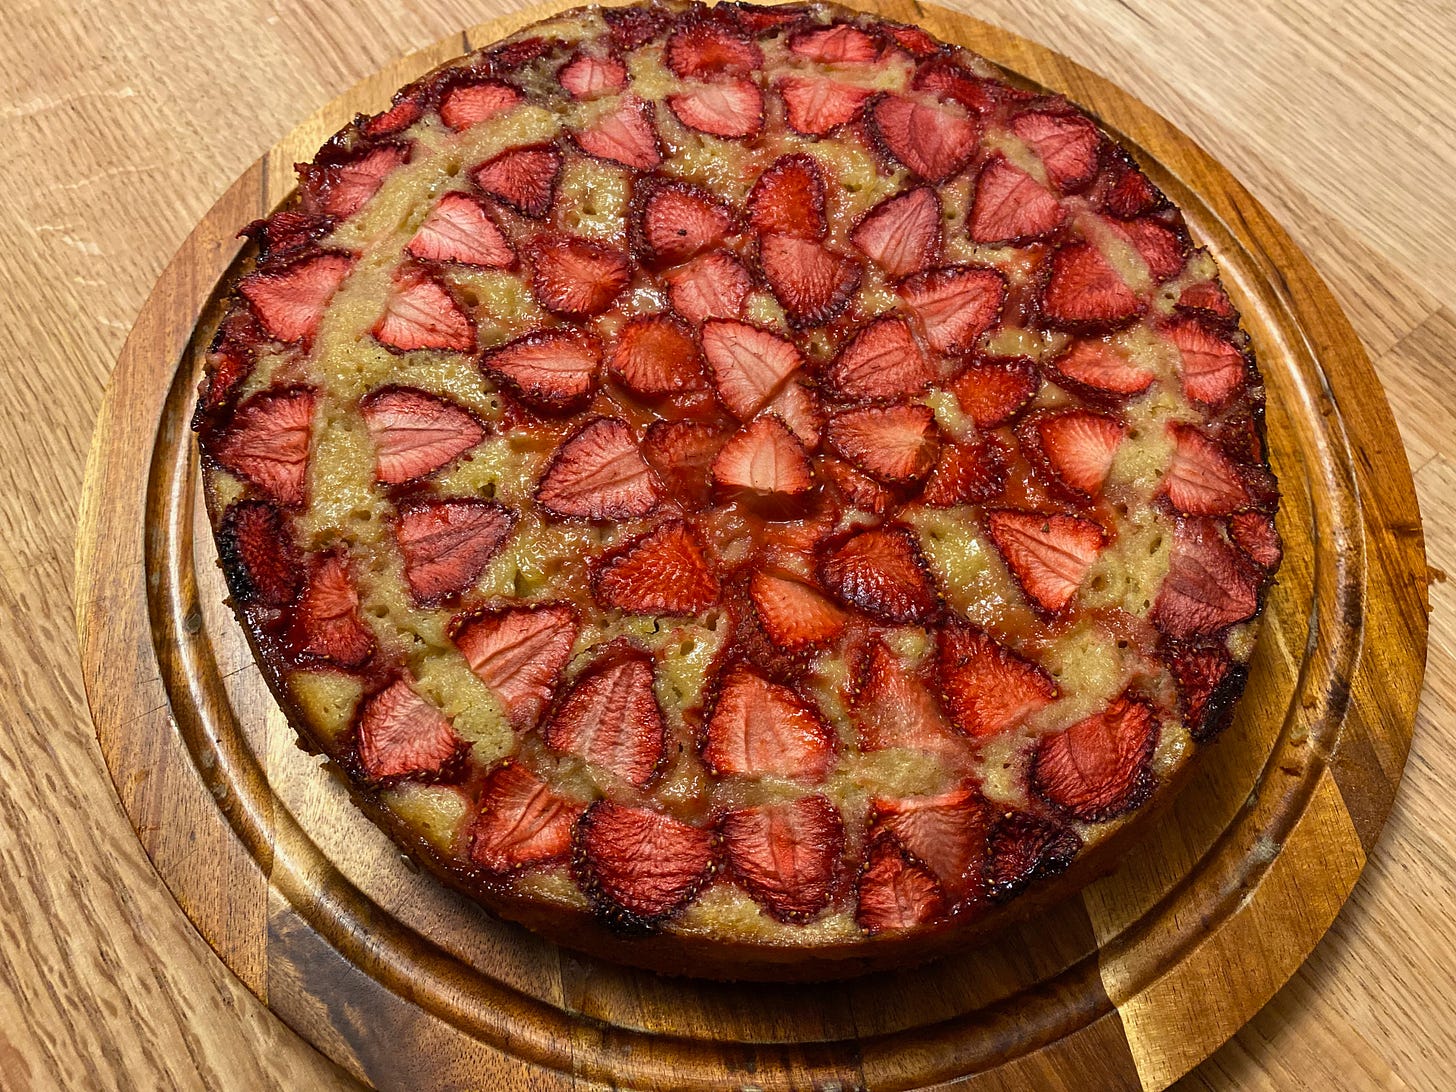 A round cake covered in sliced strawberries arranged in circles sits on a wooden counter.